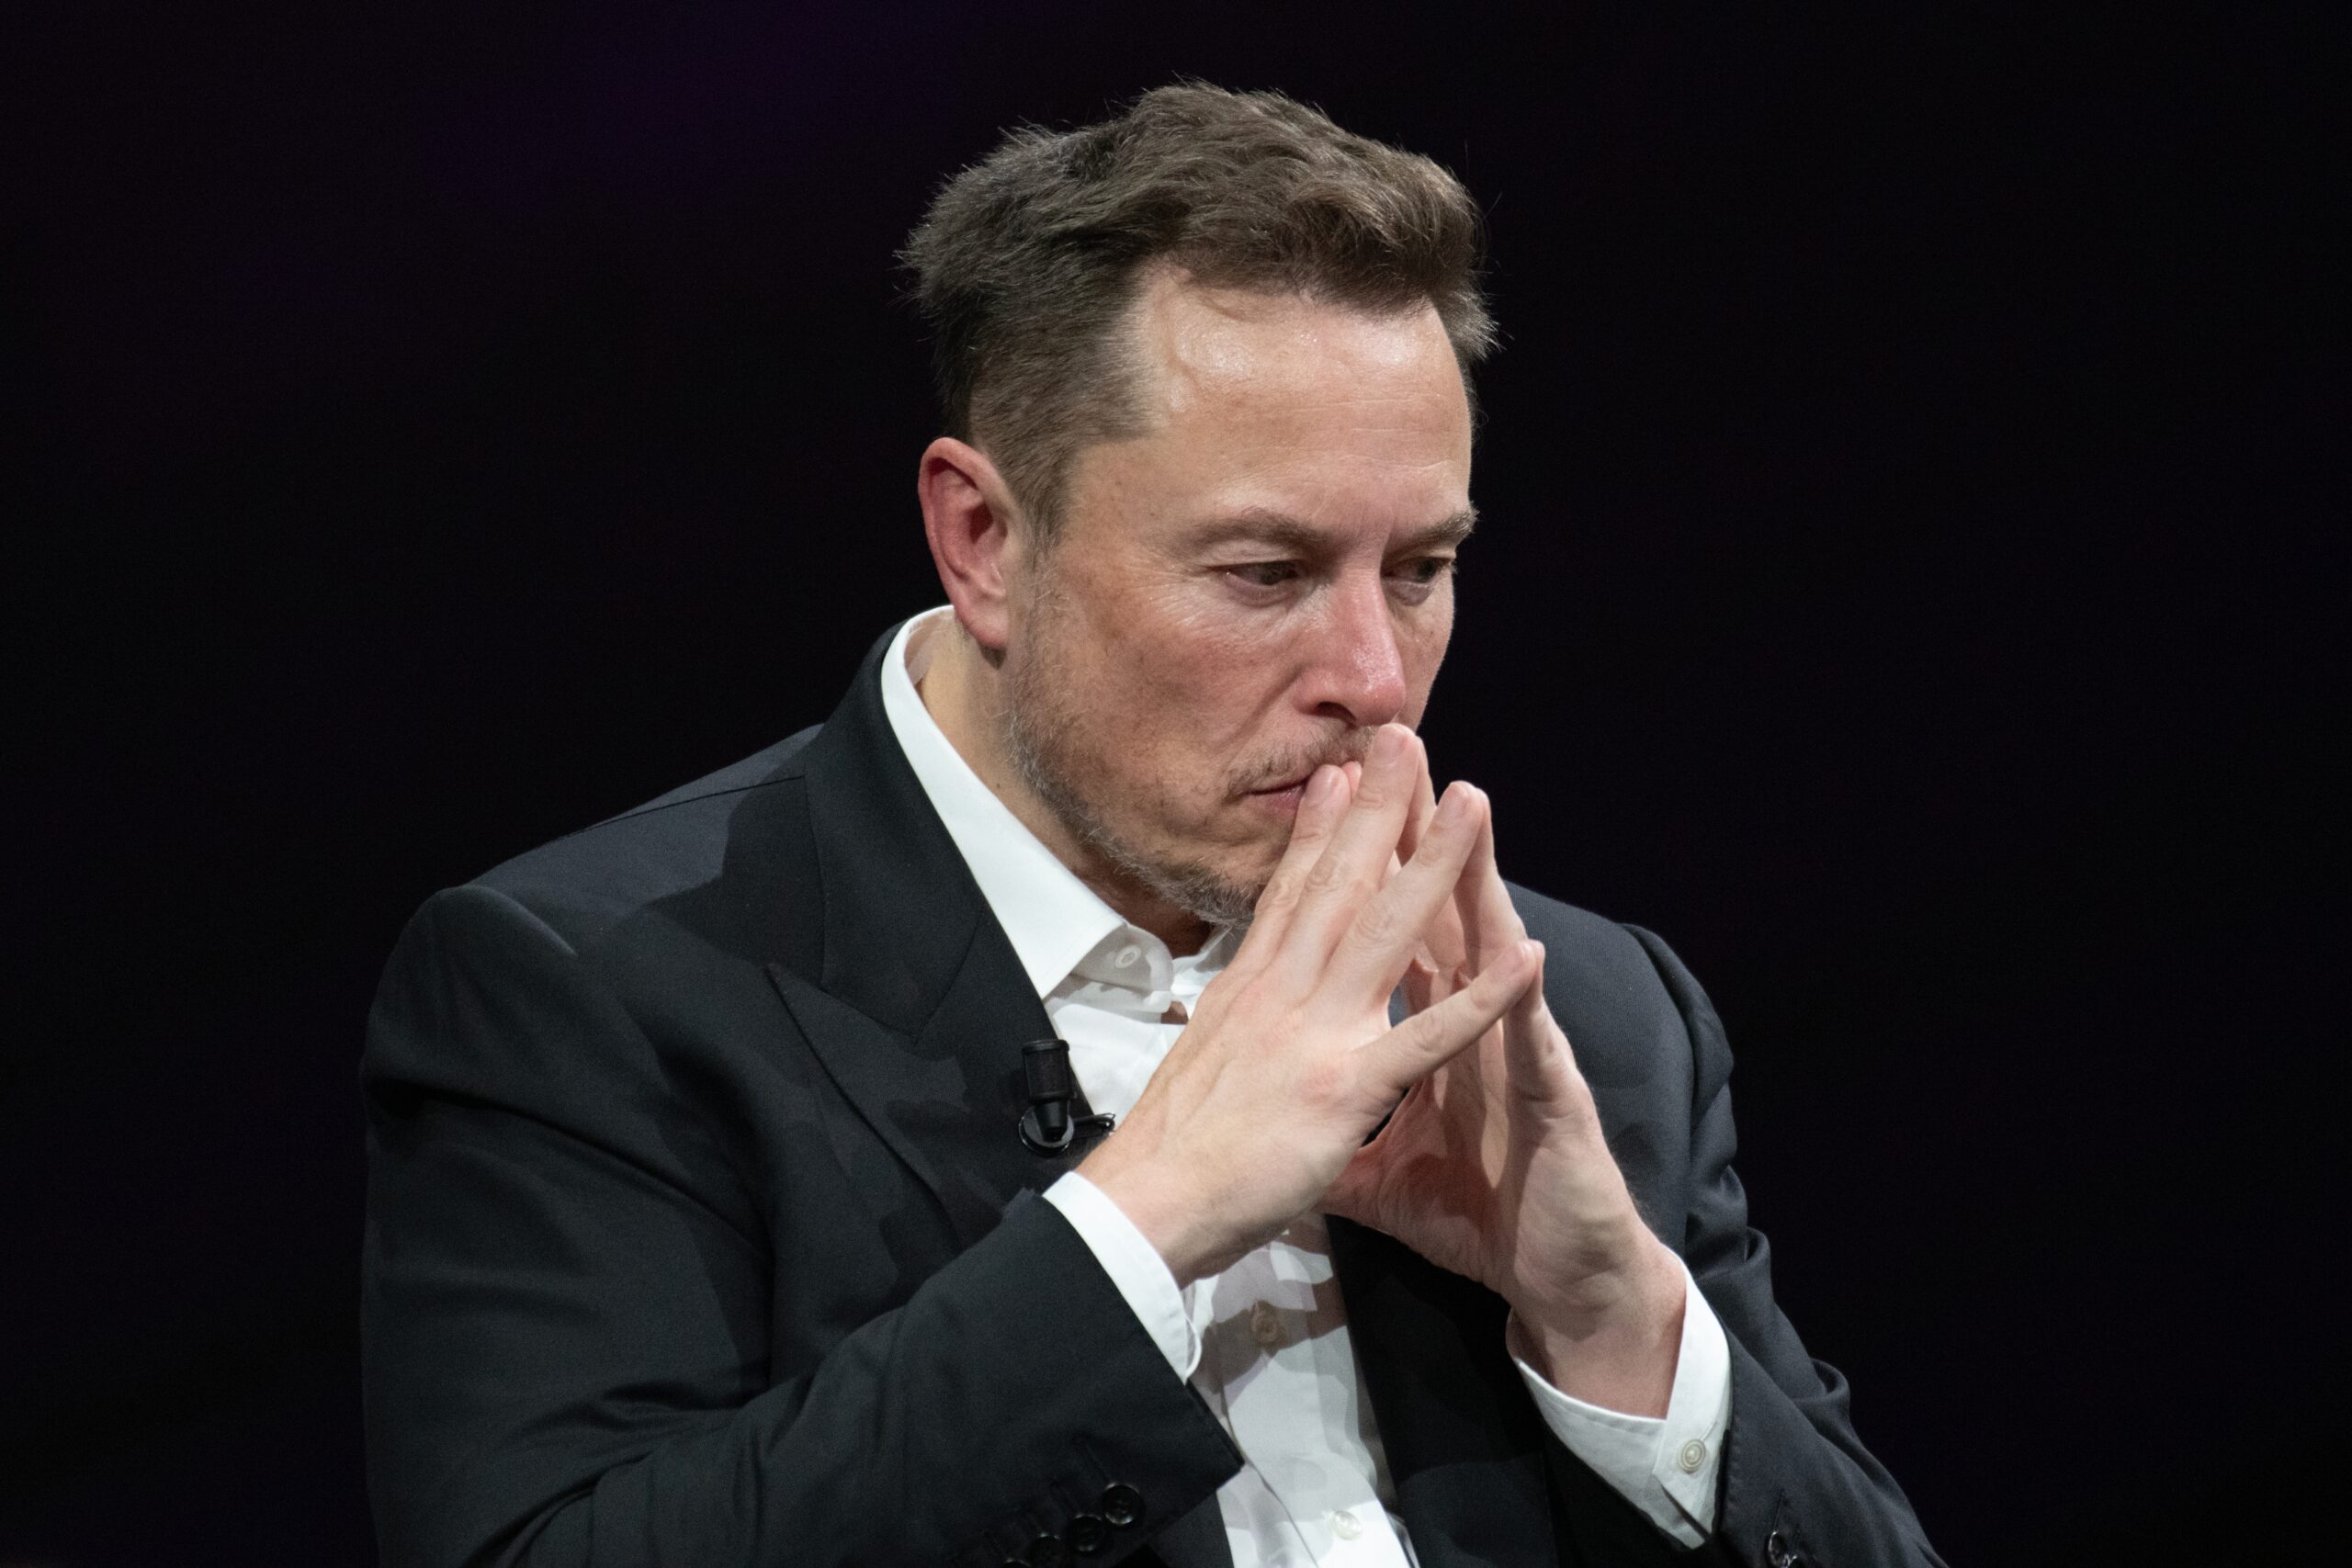 3 Things You Should Know About Elon’s “Big News”